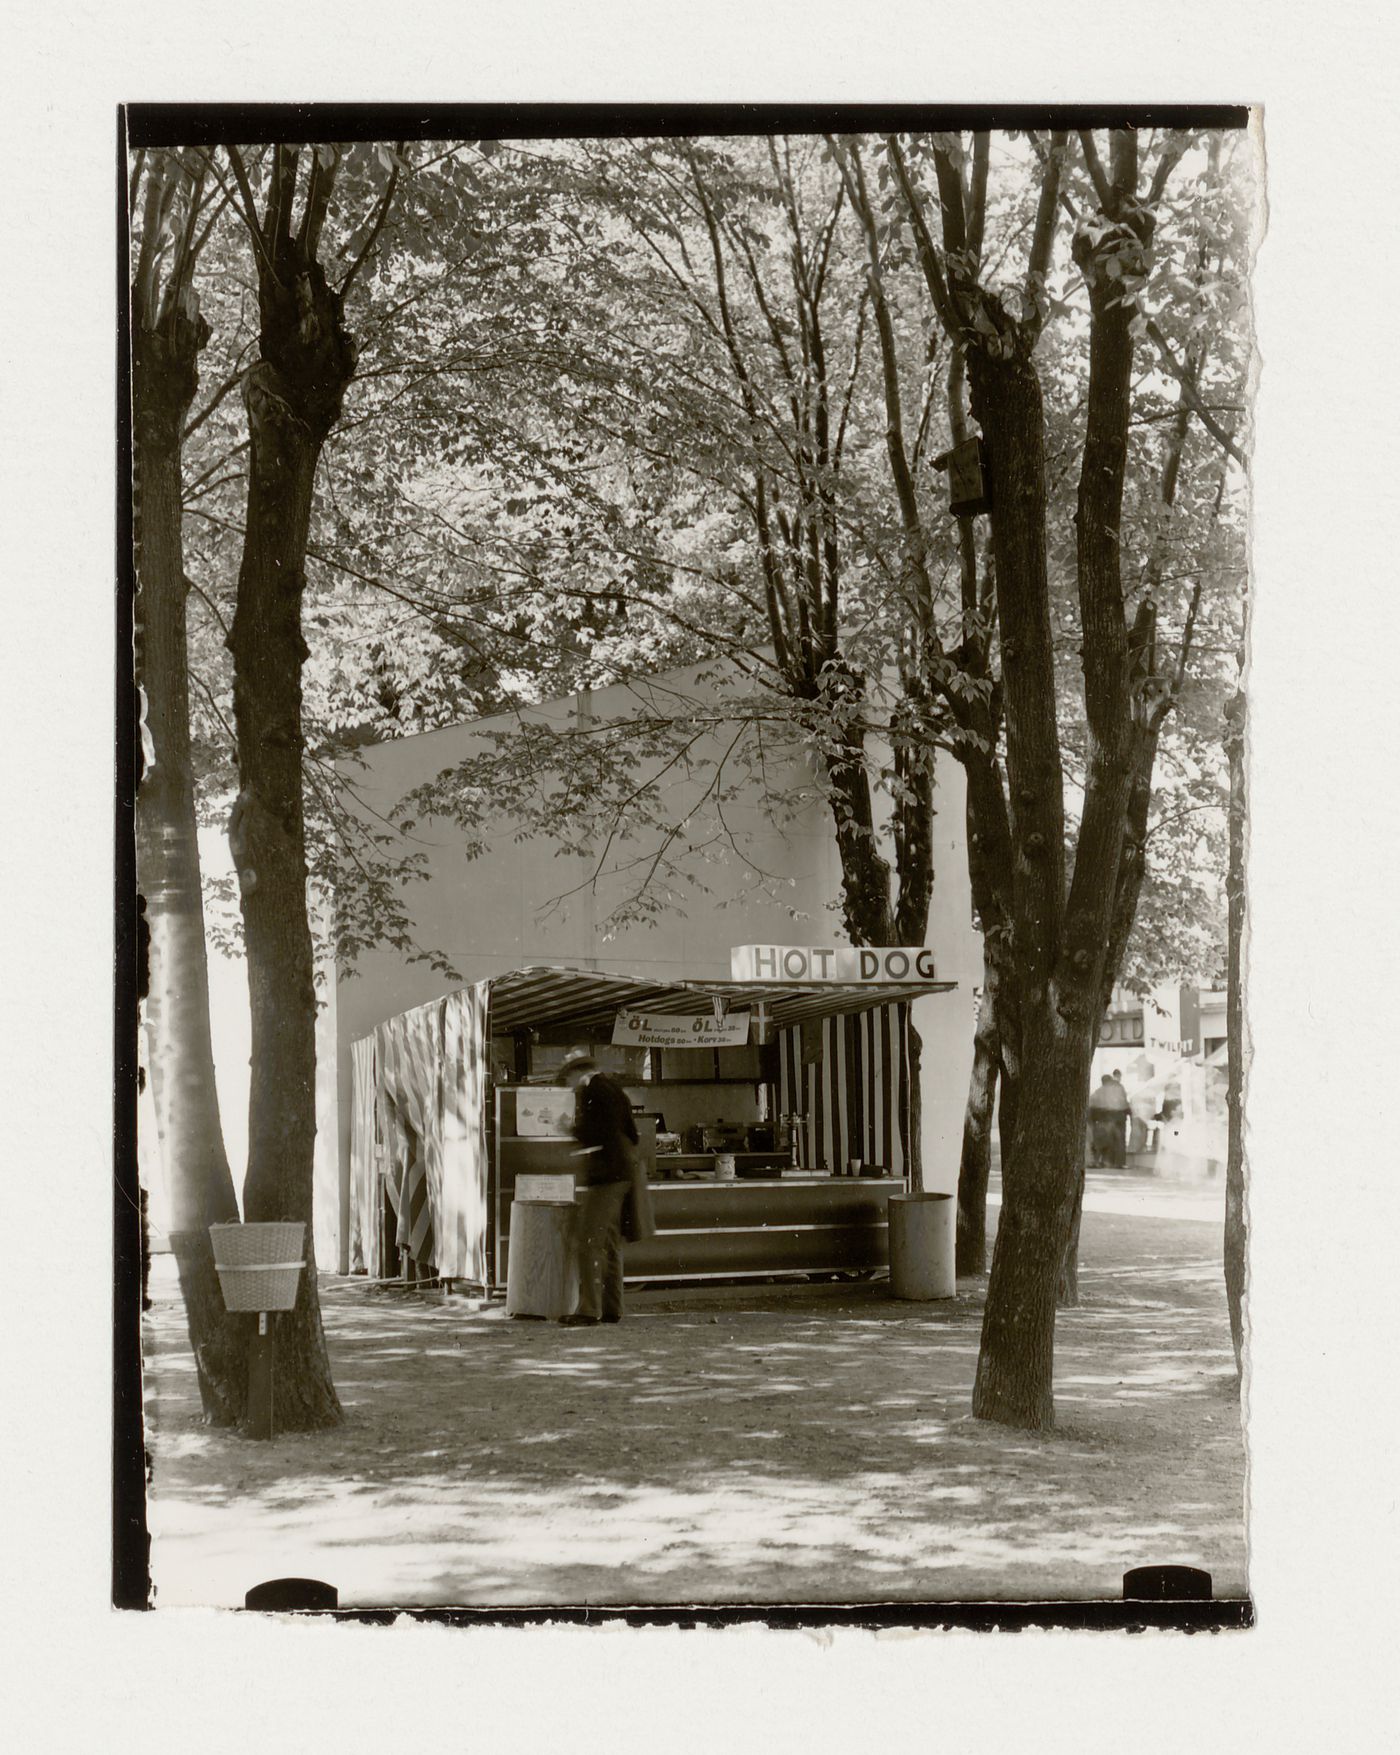 Exterior view of the Stockholm Exhibition of 1930 showing a hot-dog stand, Stockholm